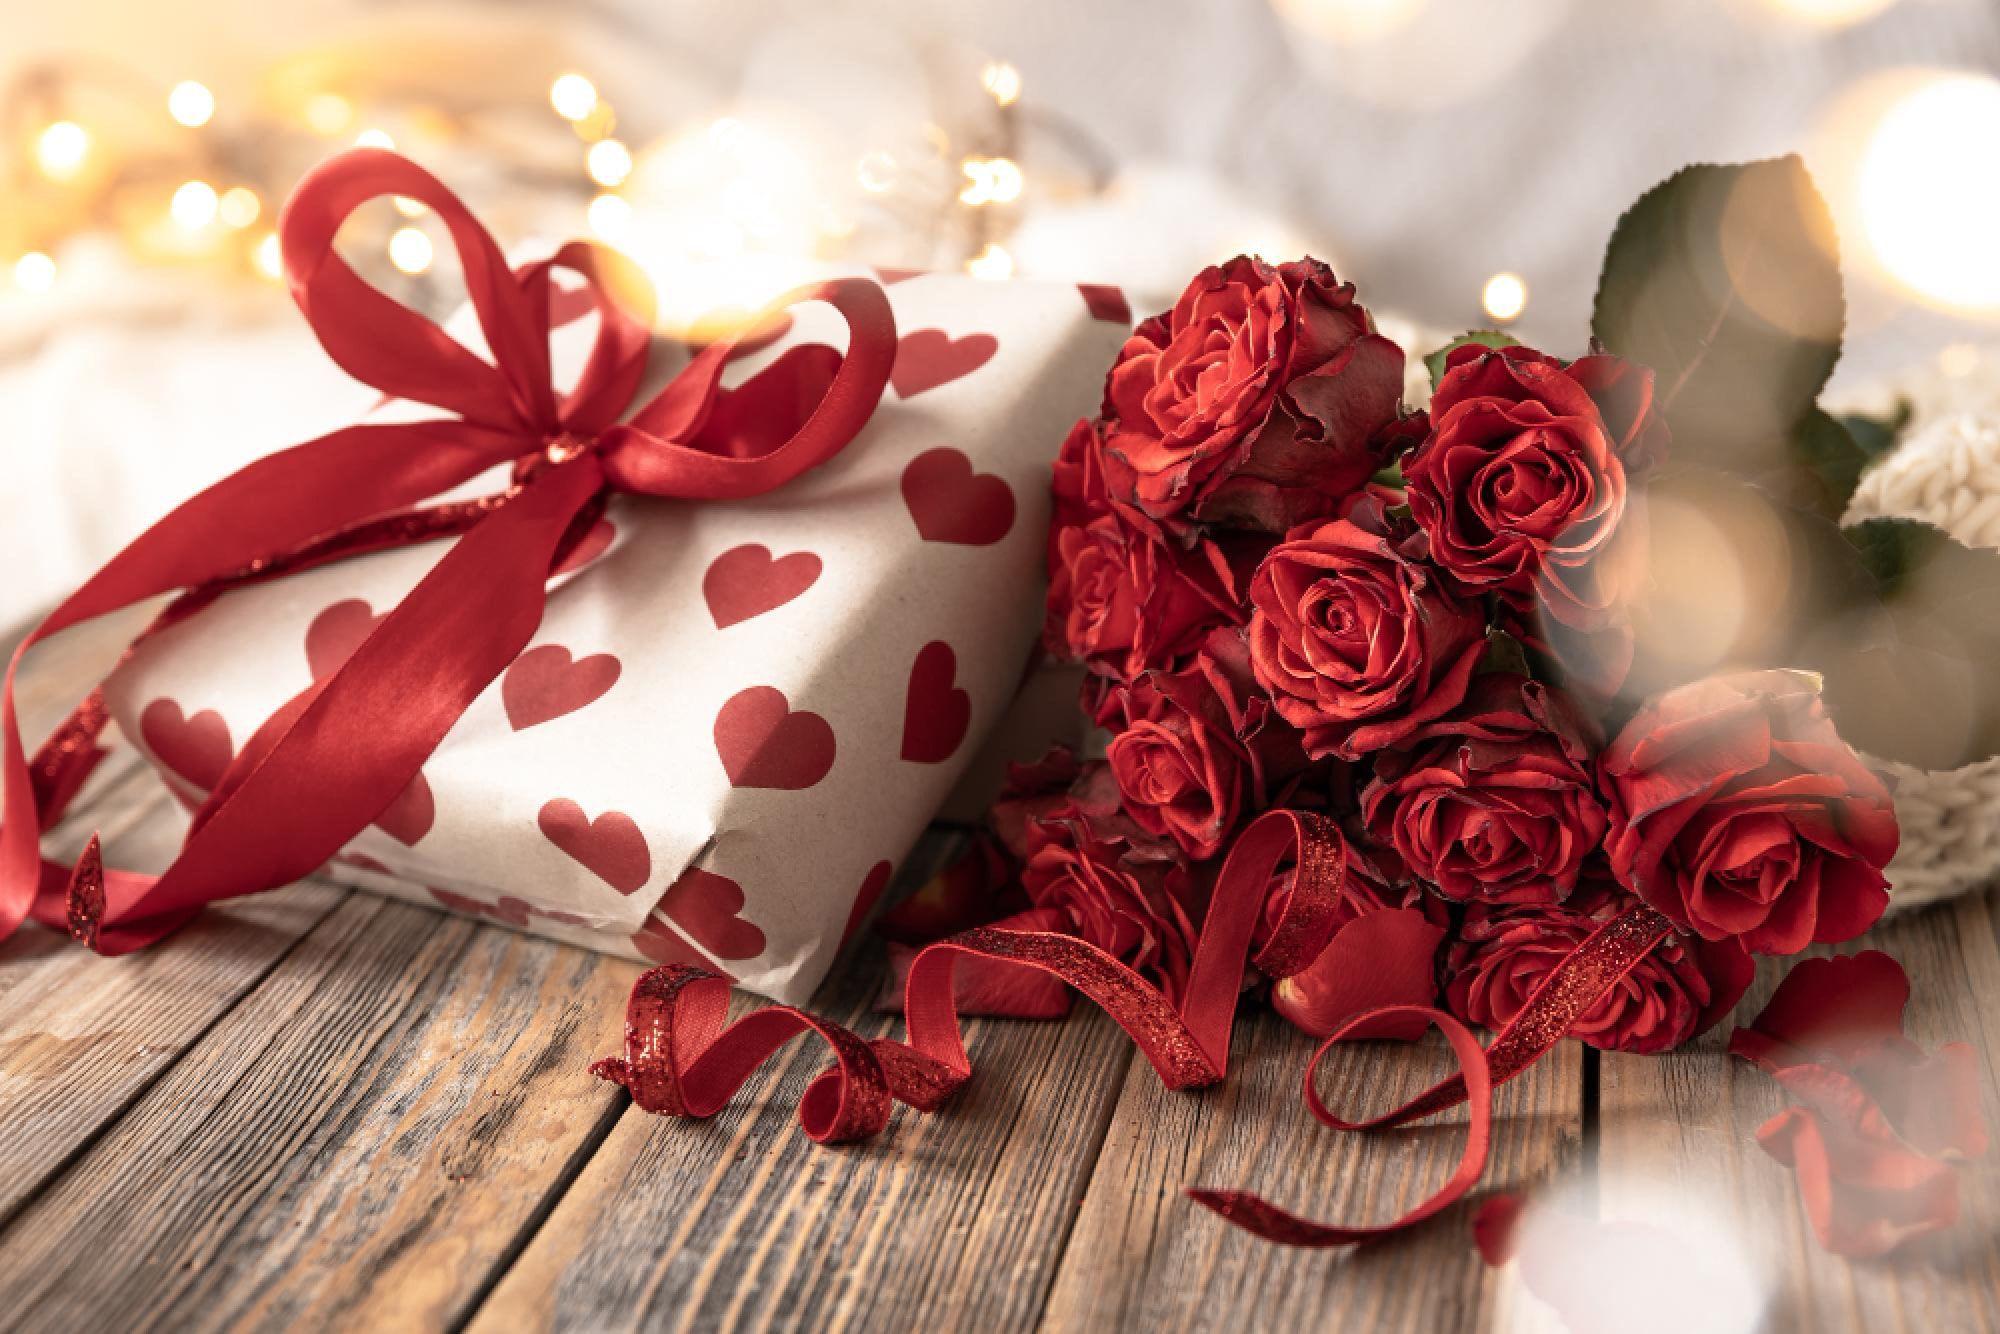 Valentine Gift Guide and Tips: Make This Valentine’s Day Unforgettable